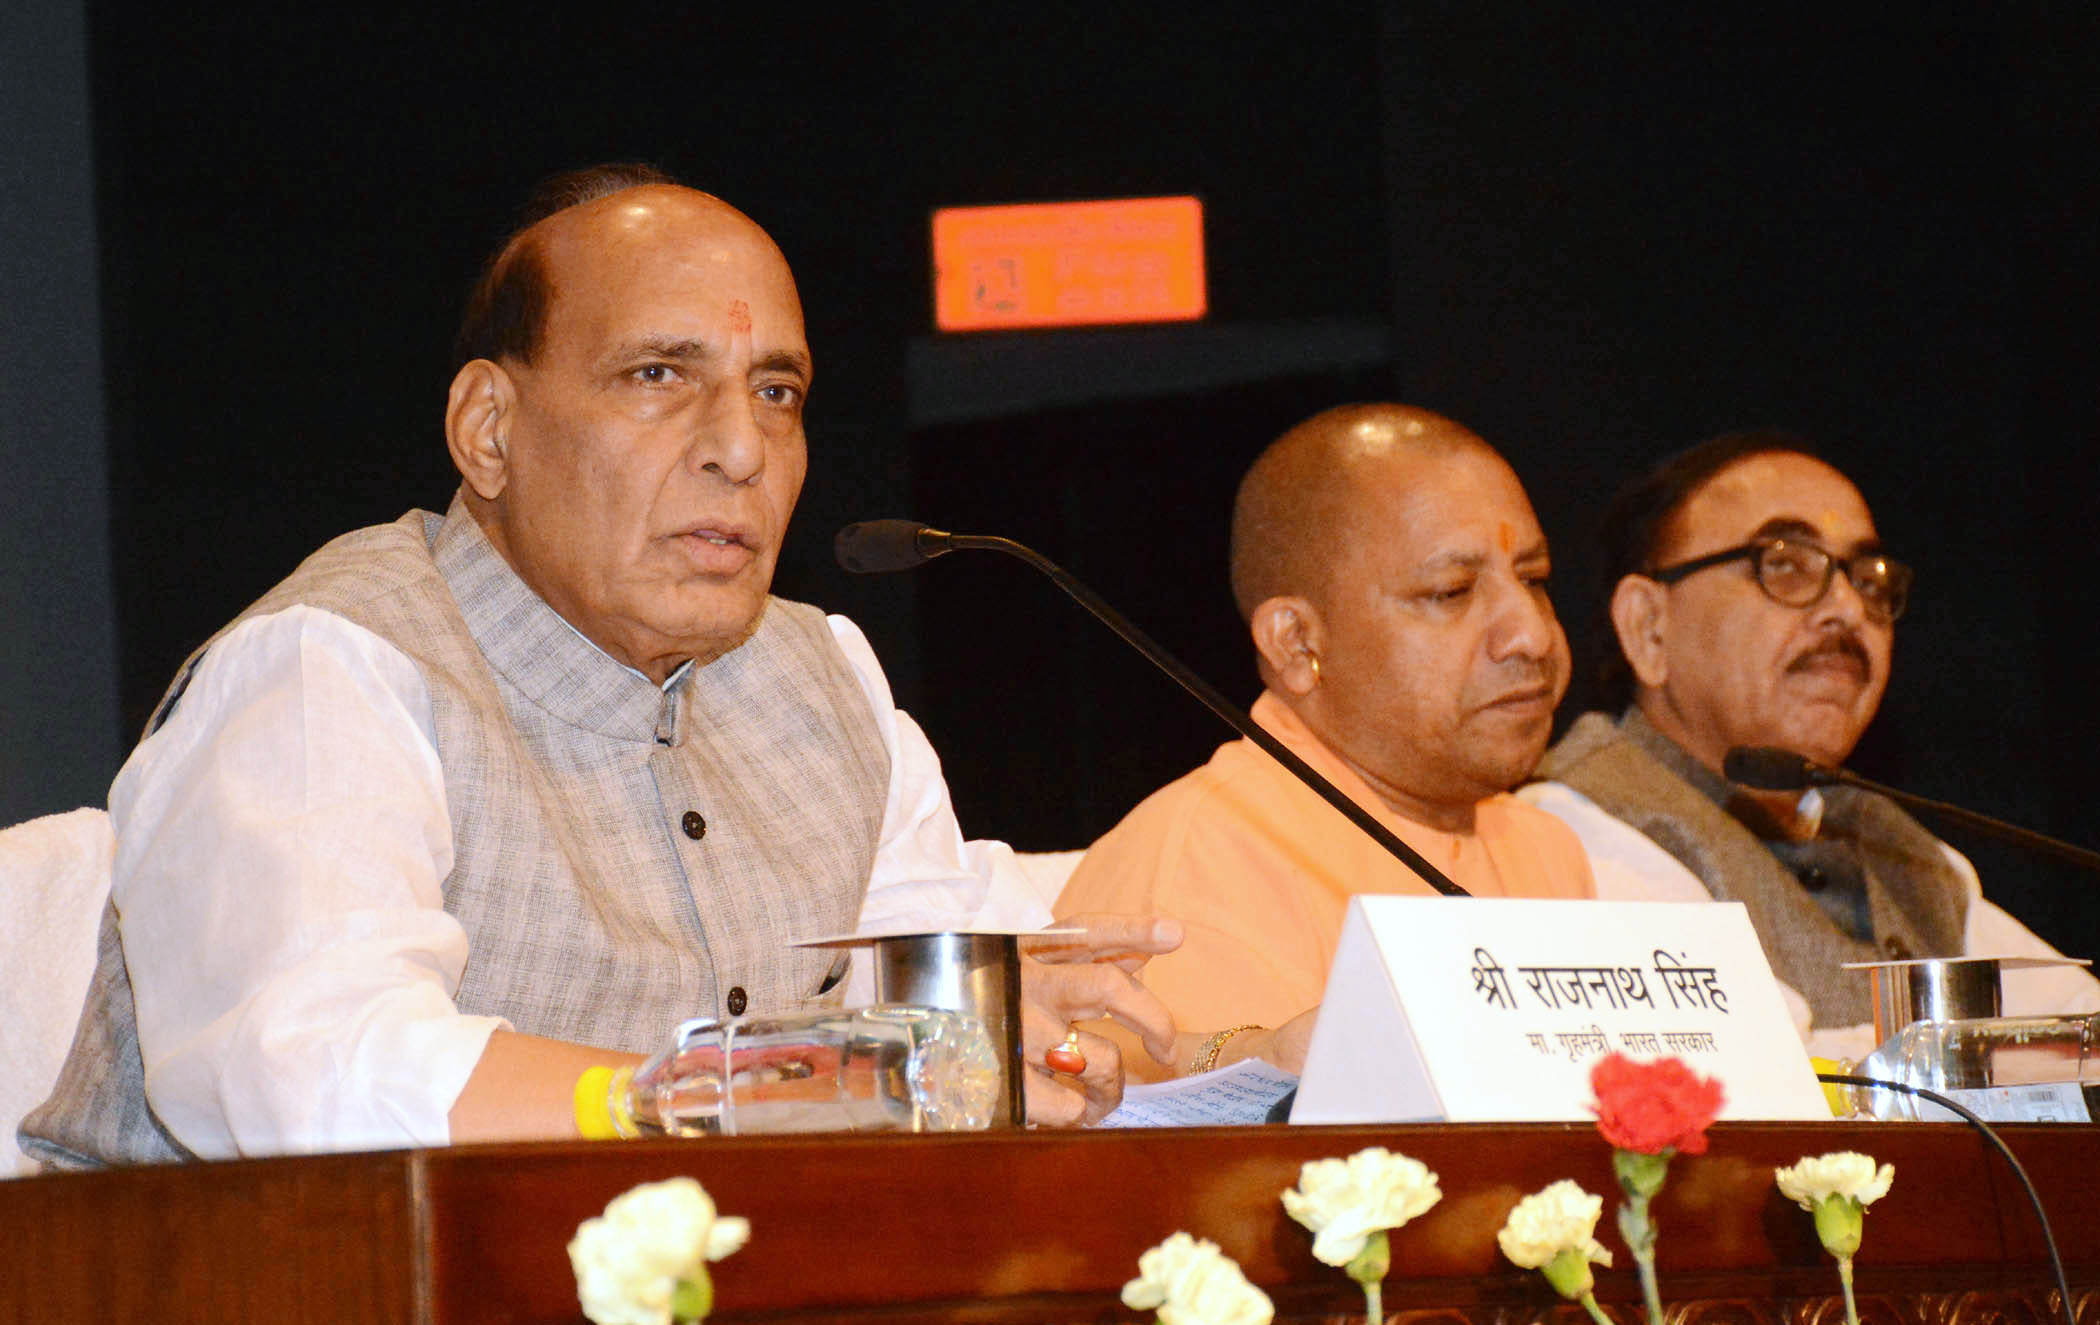 The Union Home Minister, Shri Rajnath Singh addressing a press conference, in Lucknow, Uttar Pradesh on May 29, 2018.  The Chief Minister of Uttar Pradesh, Yogi Adityanath and is also seen.